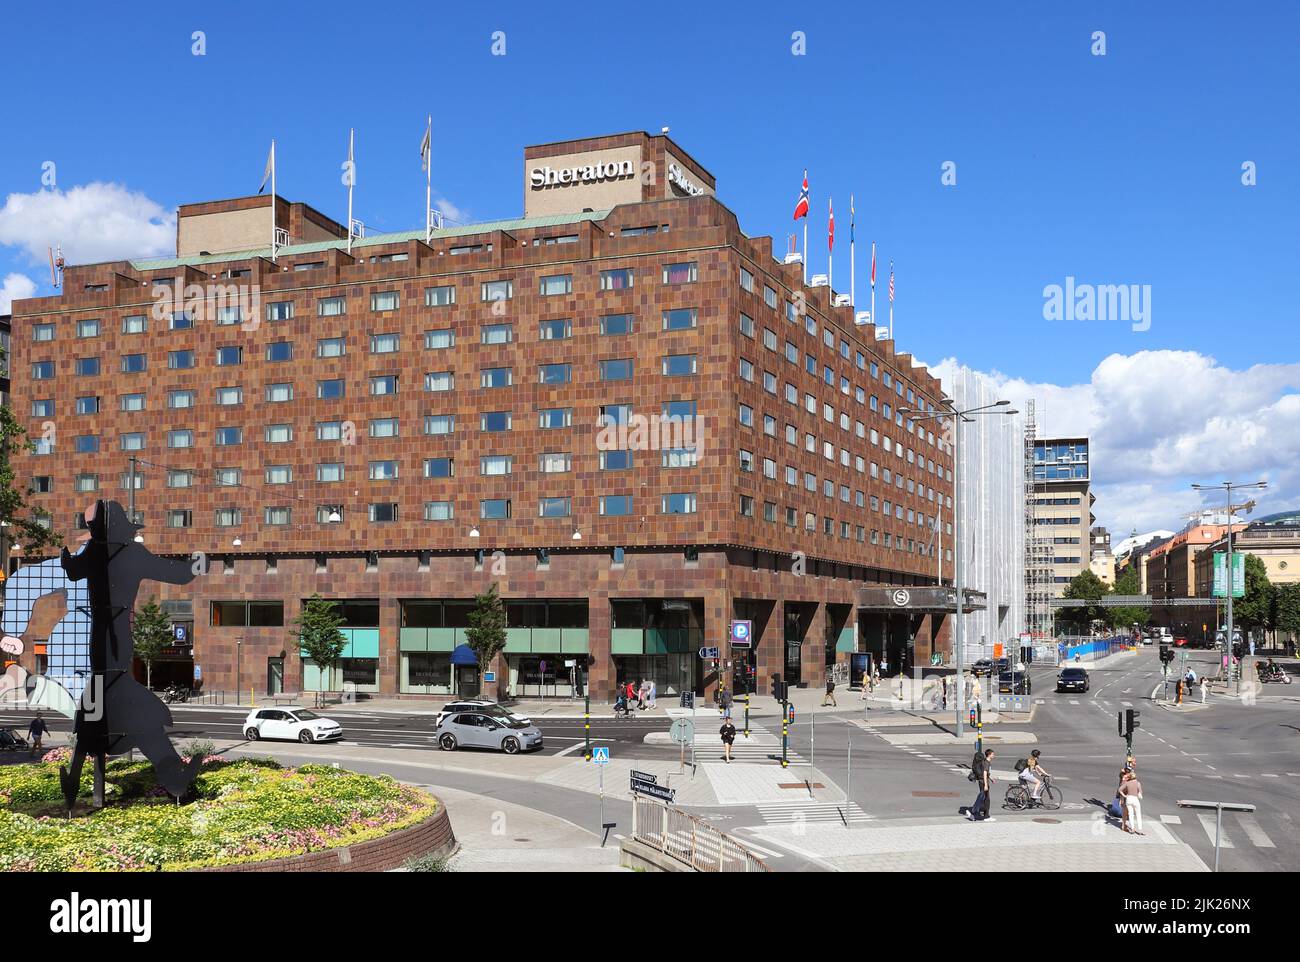 Stockholm, Sweden - July 29, 2022: View of the Sheraton hotel at the Tegelbacken area. Stock Photo